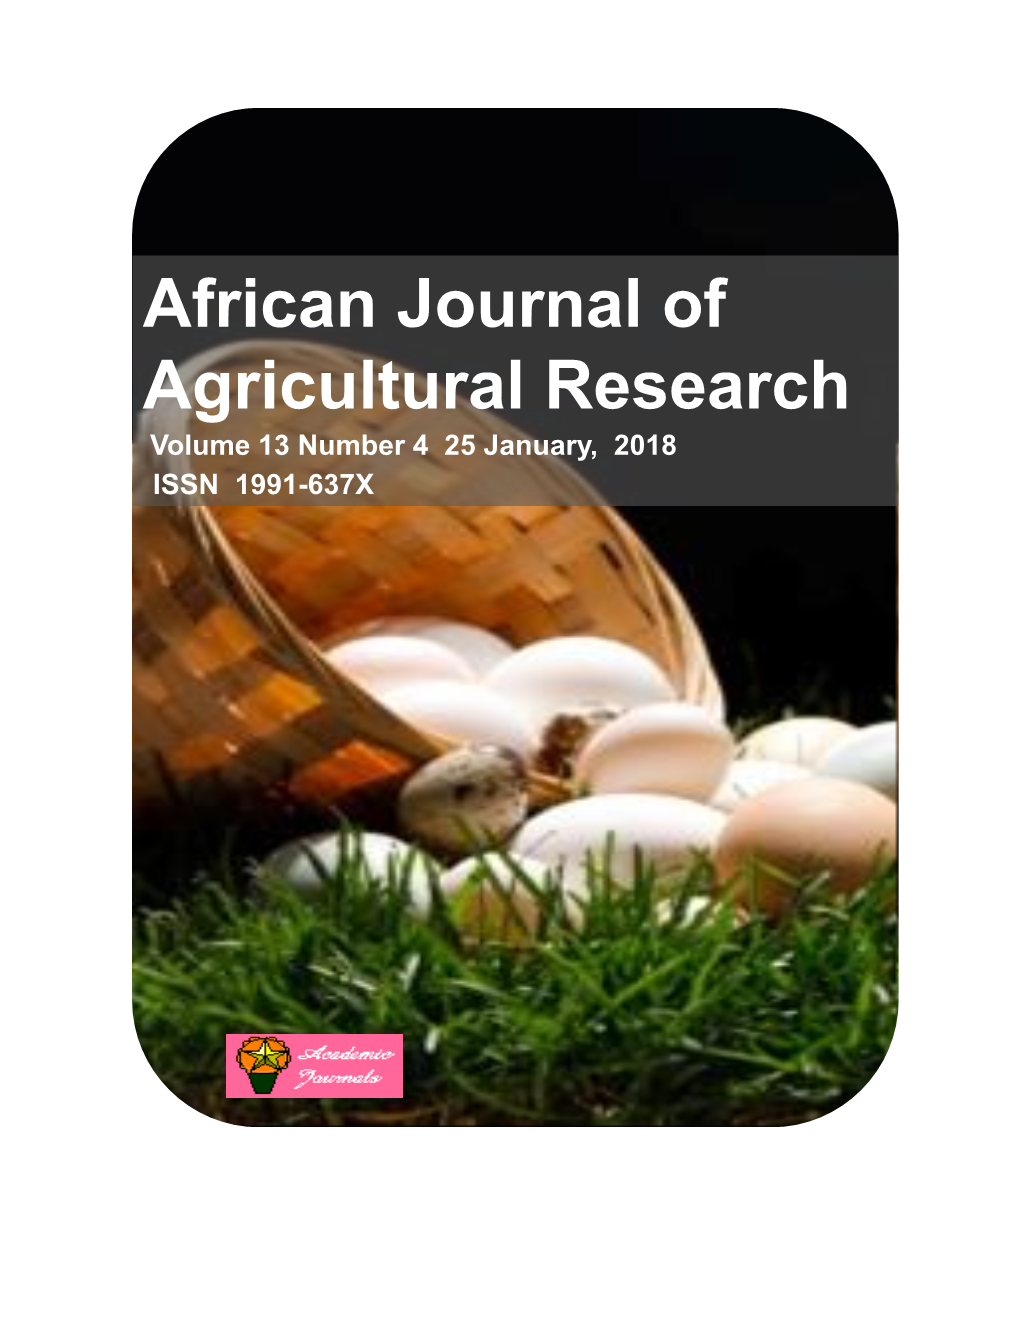 African Journal of Agricultural Research Volume 13 Number 4 25 January, 2018 ISSN 1991-637X